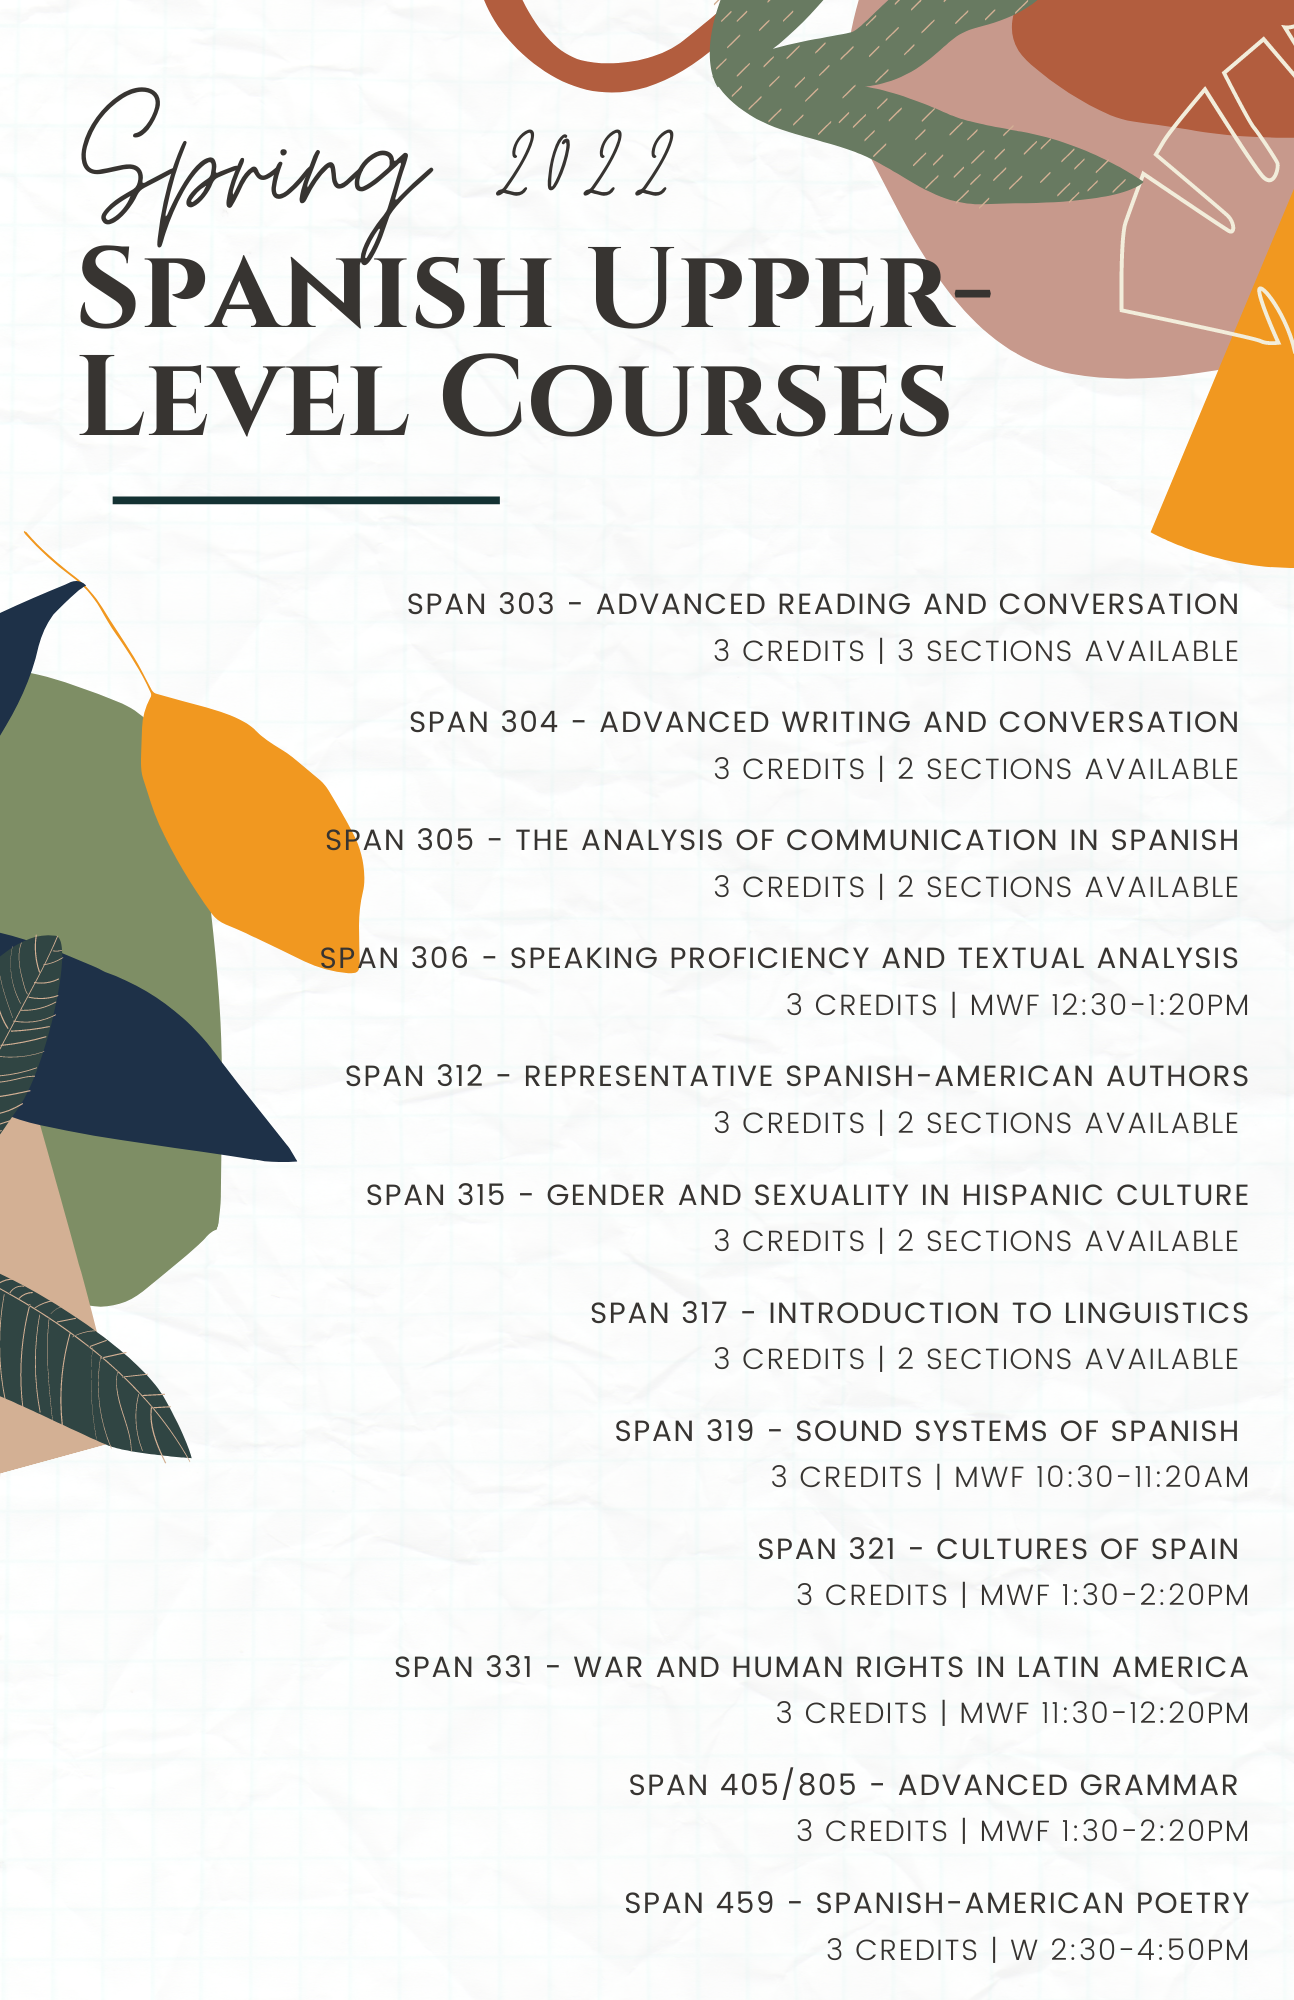 Spring 2022 Spanish Upper-Level Course Lineup